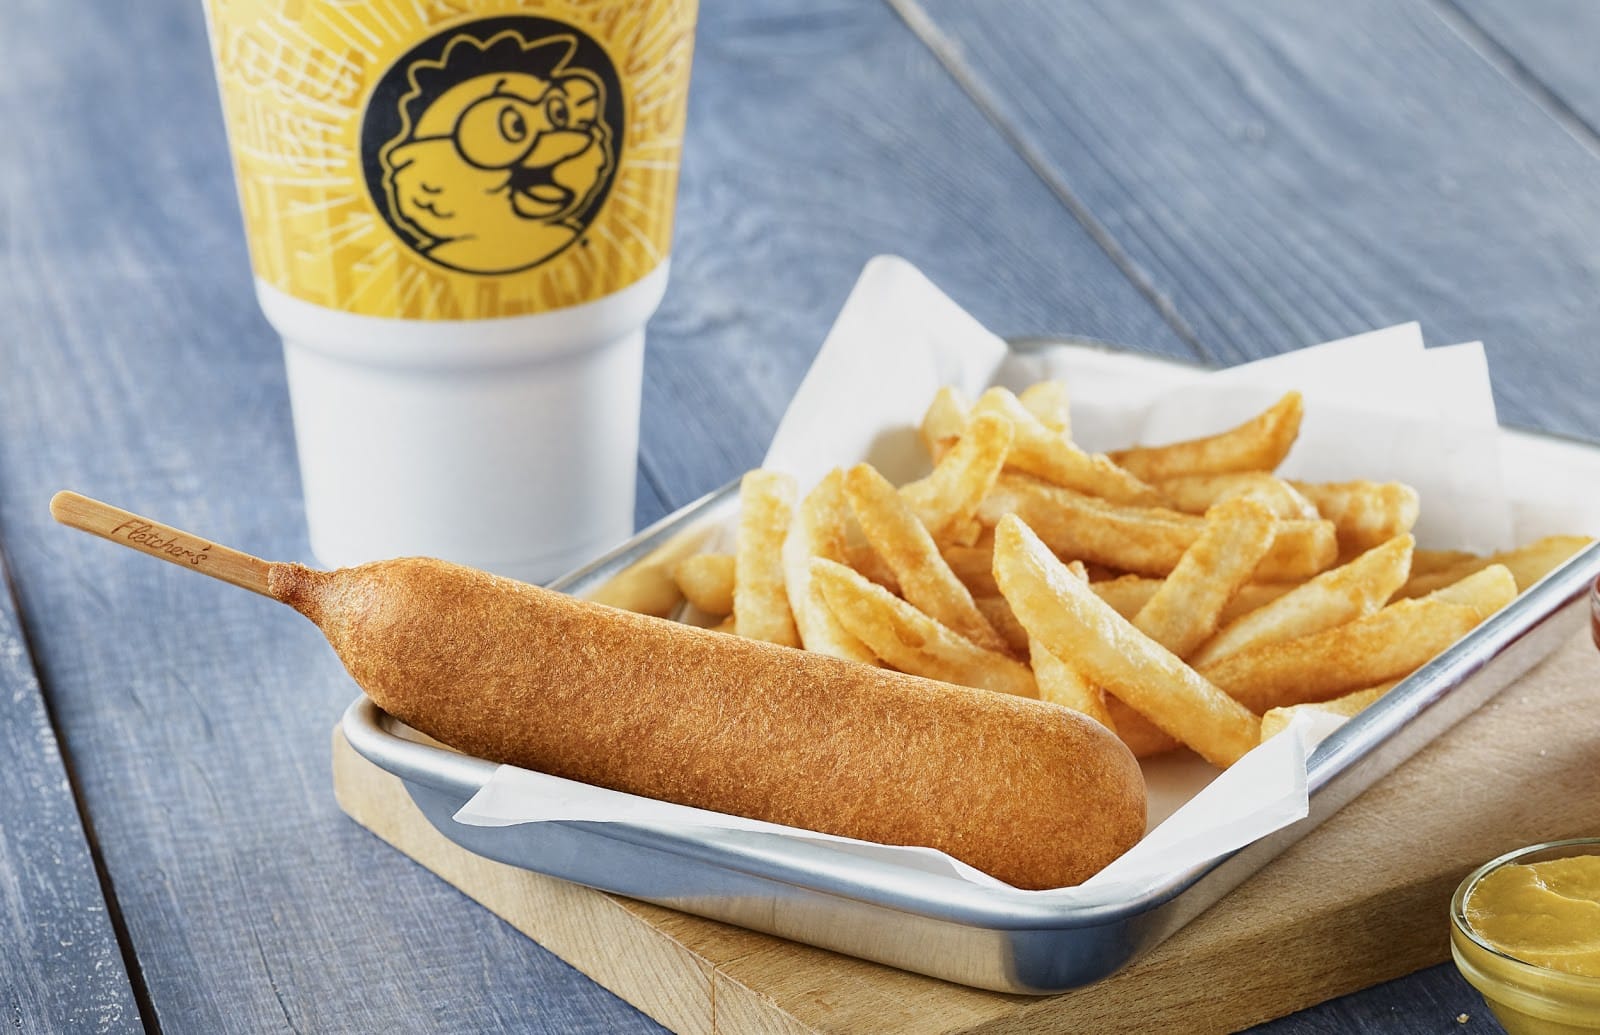 Fletchers Original Corny Dogs Available At Golden Chick 3